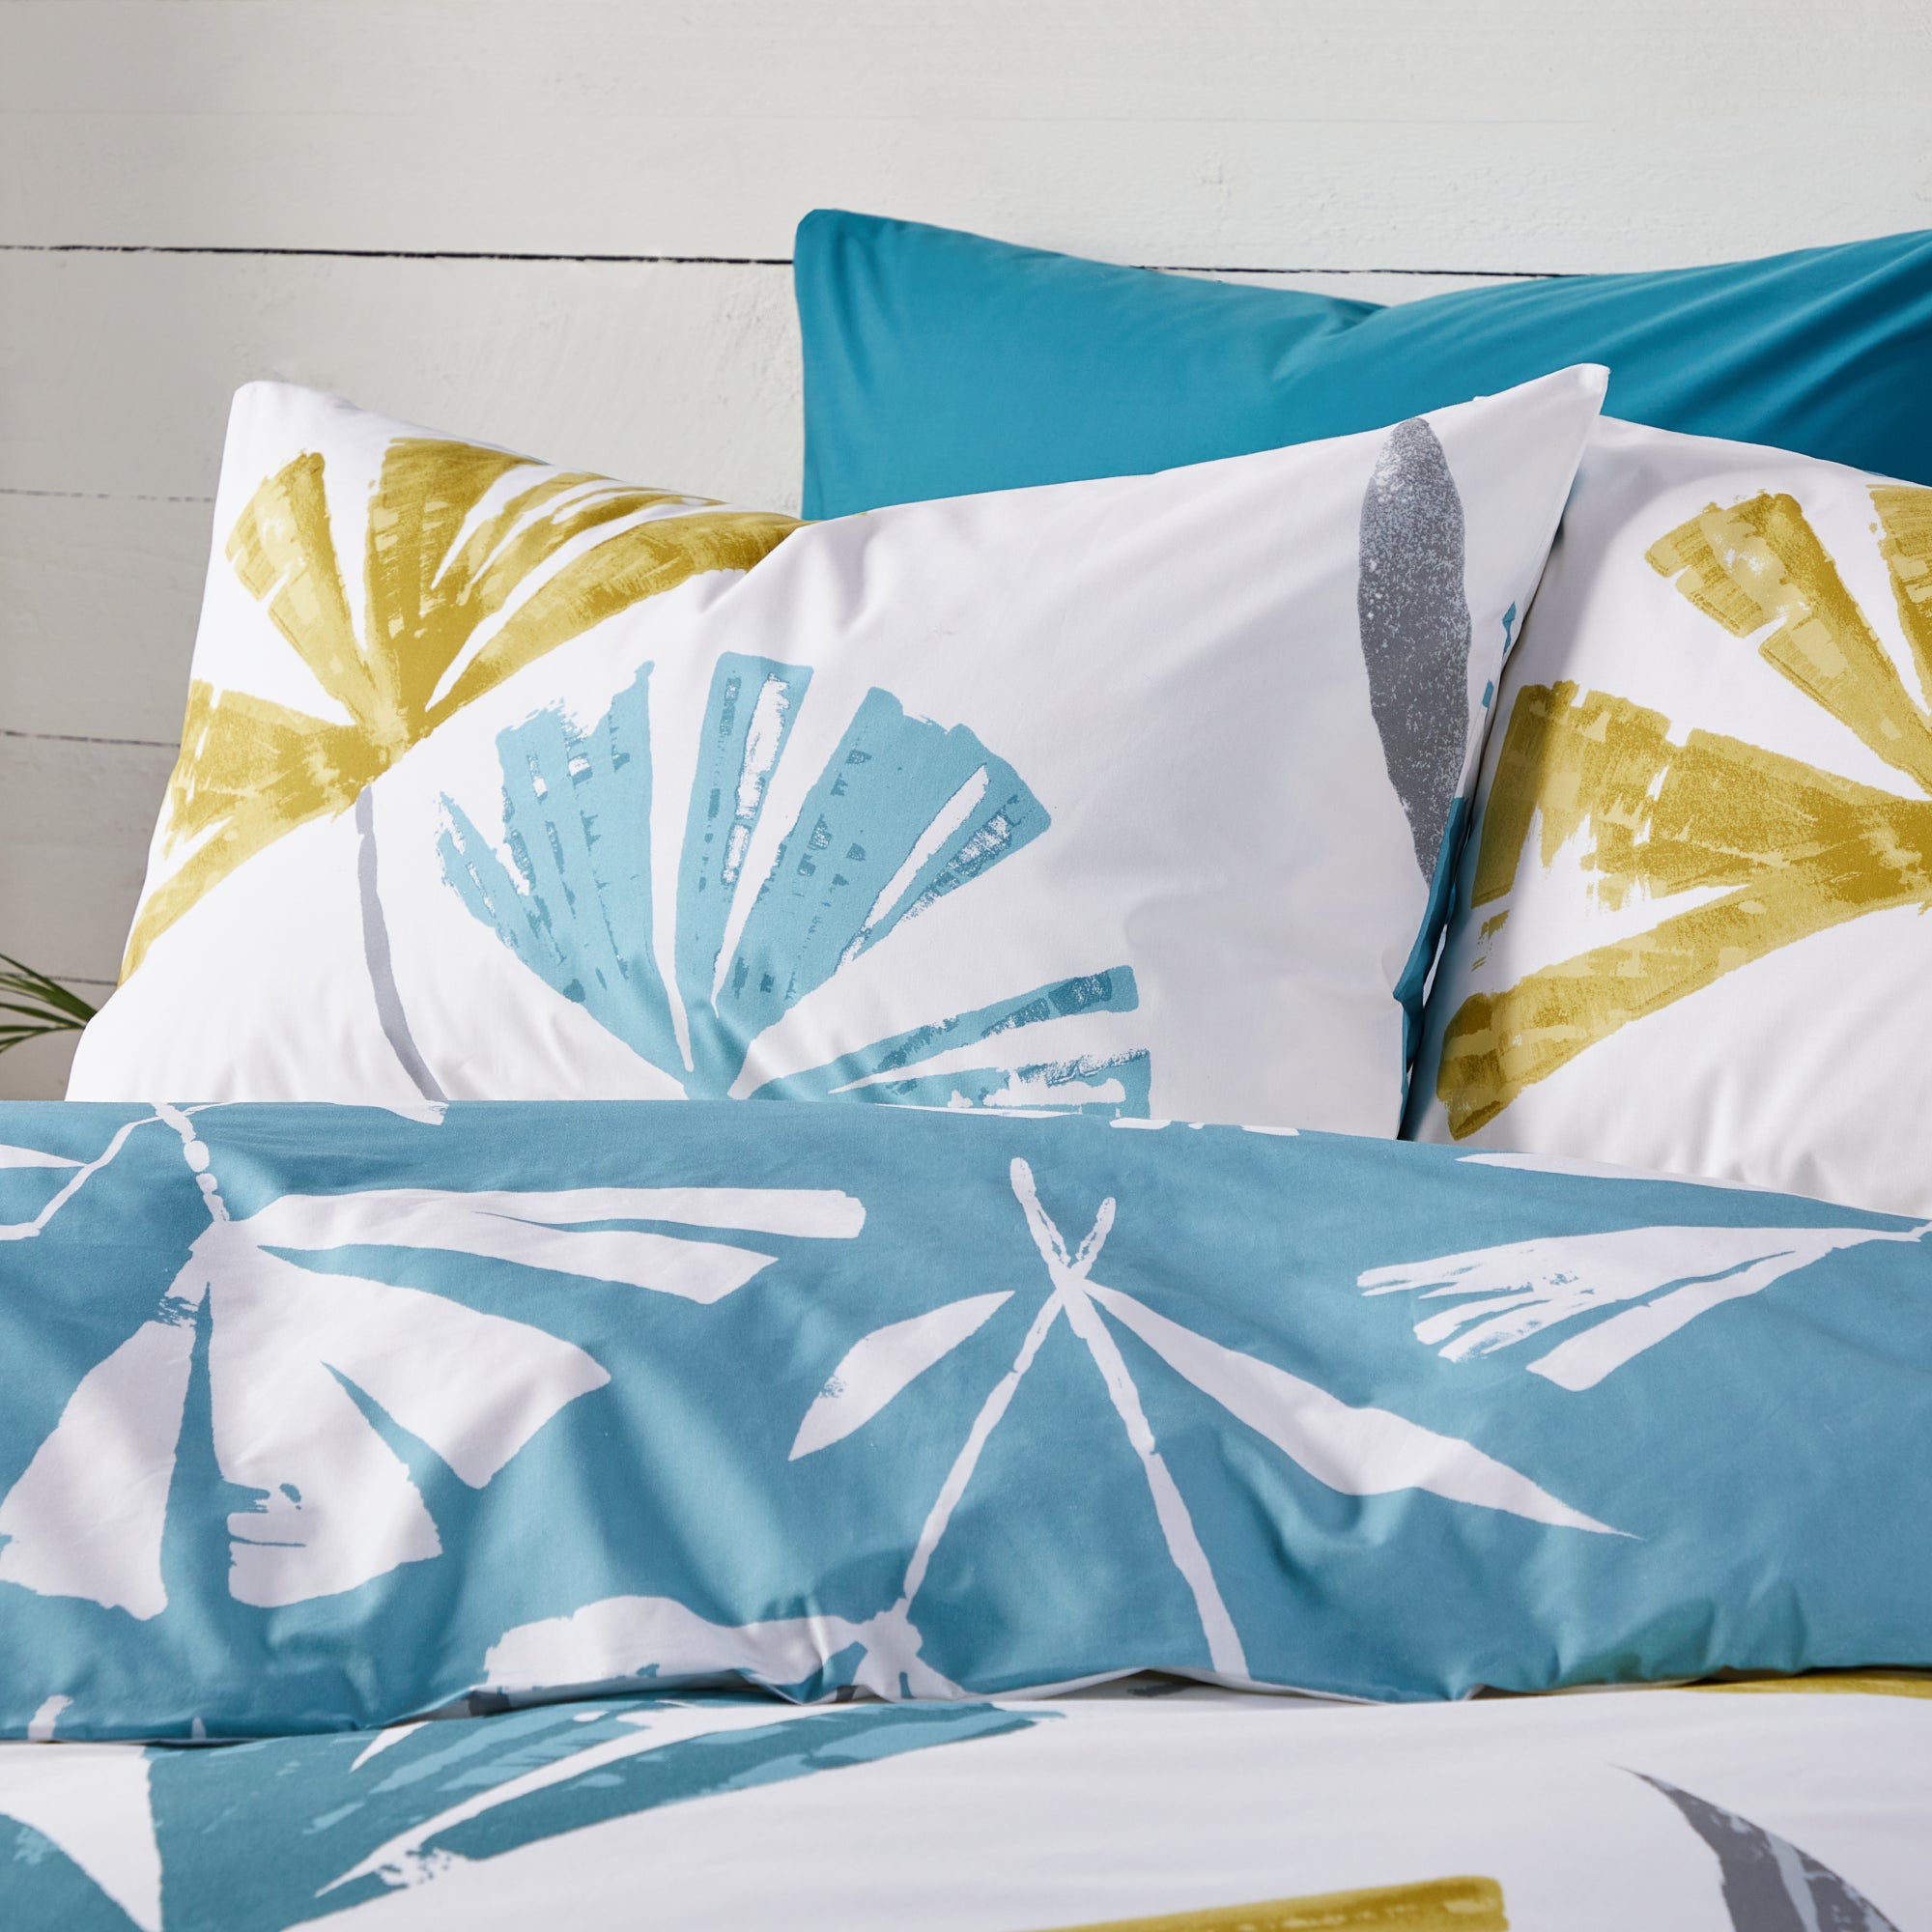 Duvet Cover Set Alma by Fusion in Teal